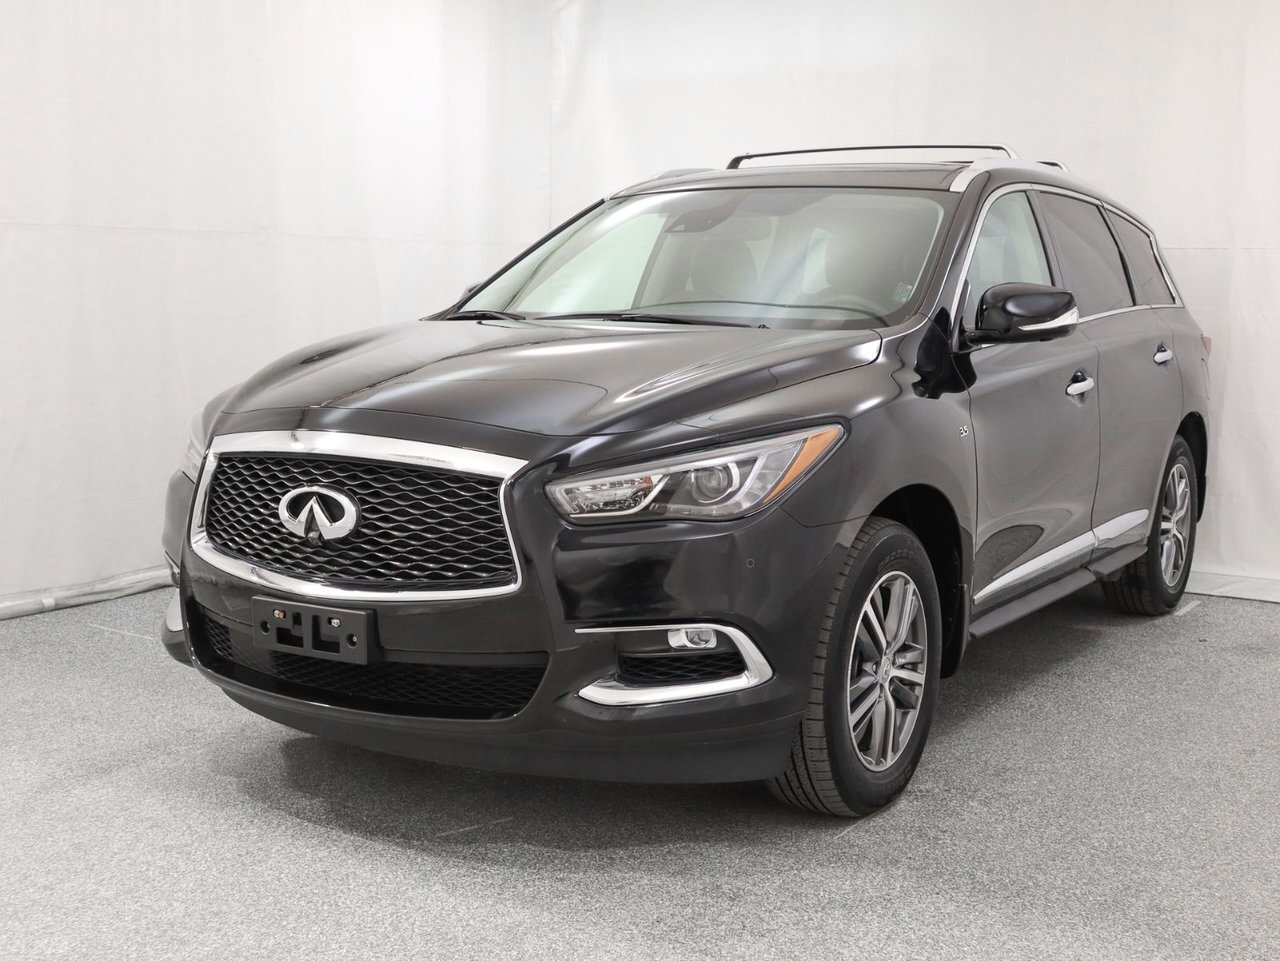 2020 Infiniti QX60 Essential Certified from $132.61/week+taxes CAM 36